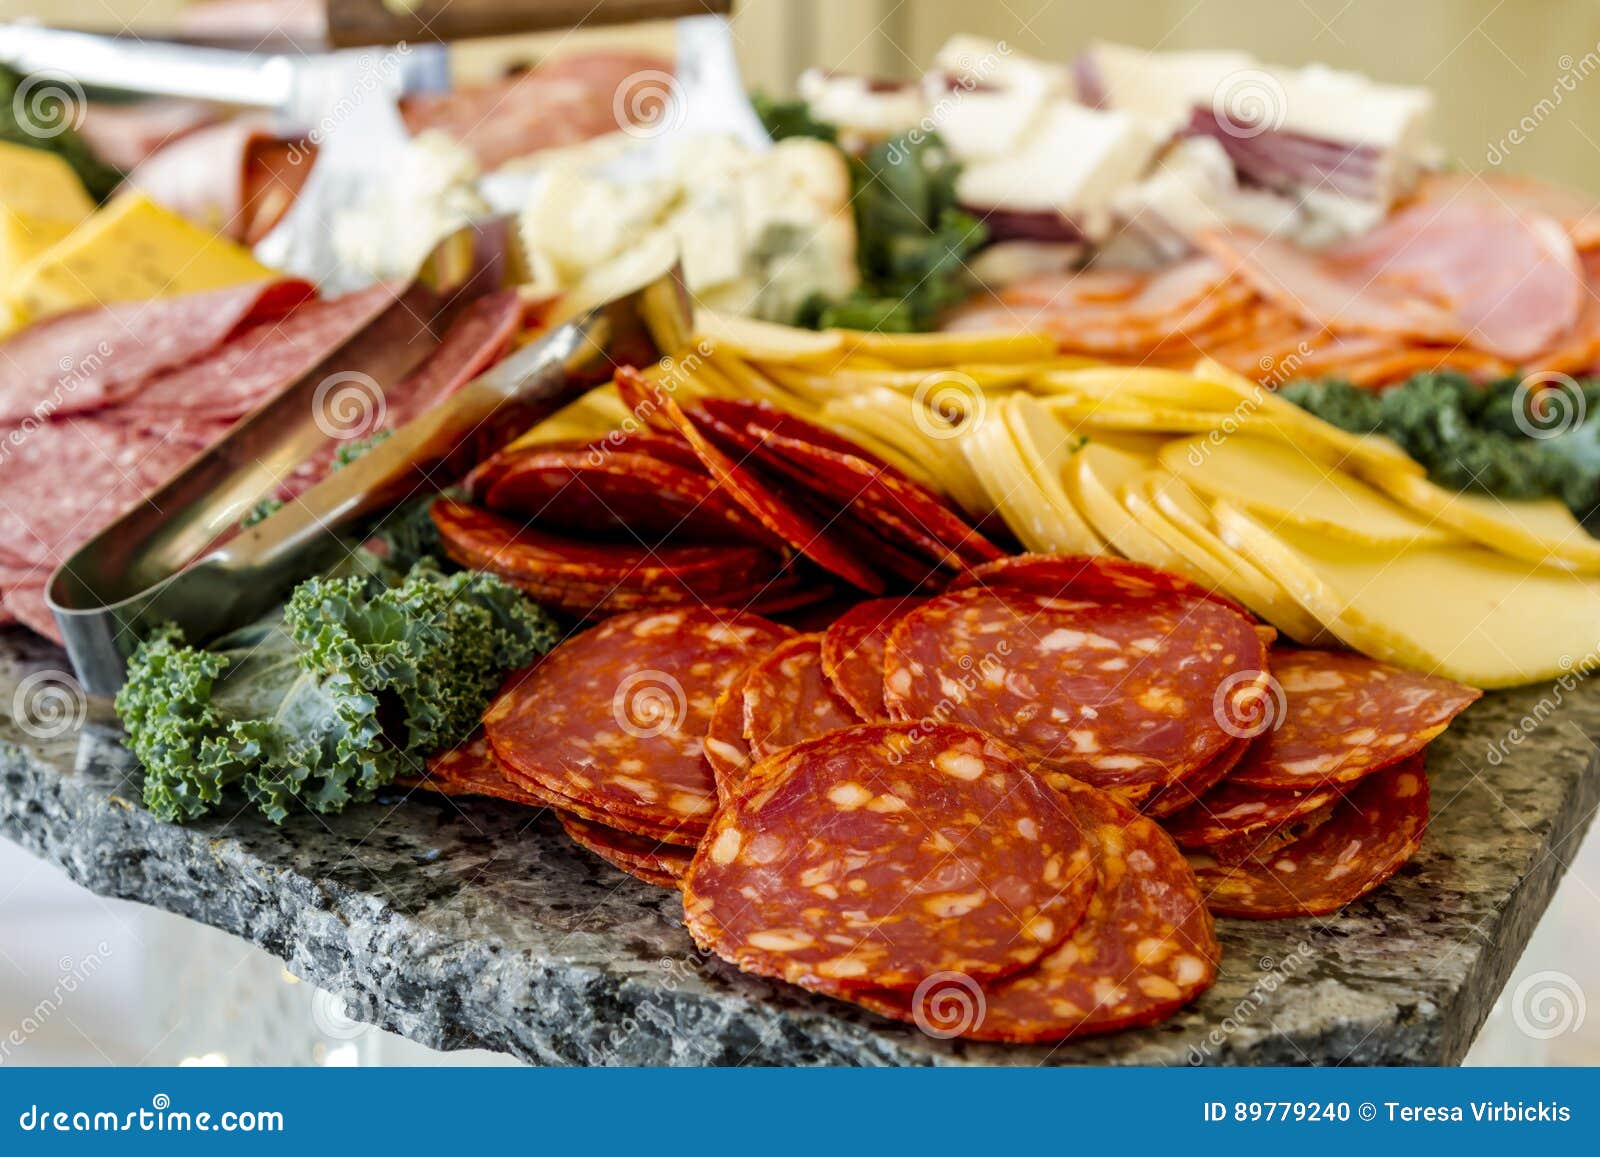 meat and cheese party tray